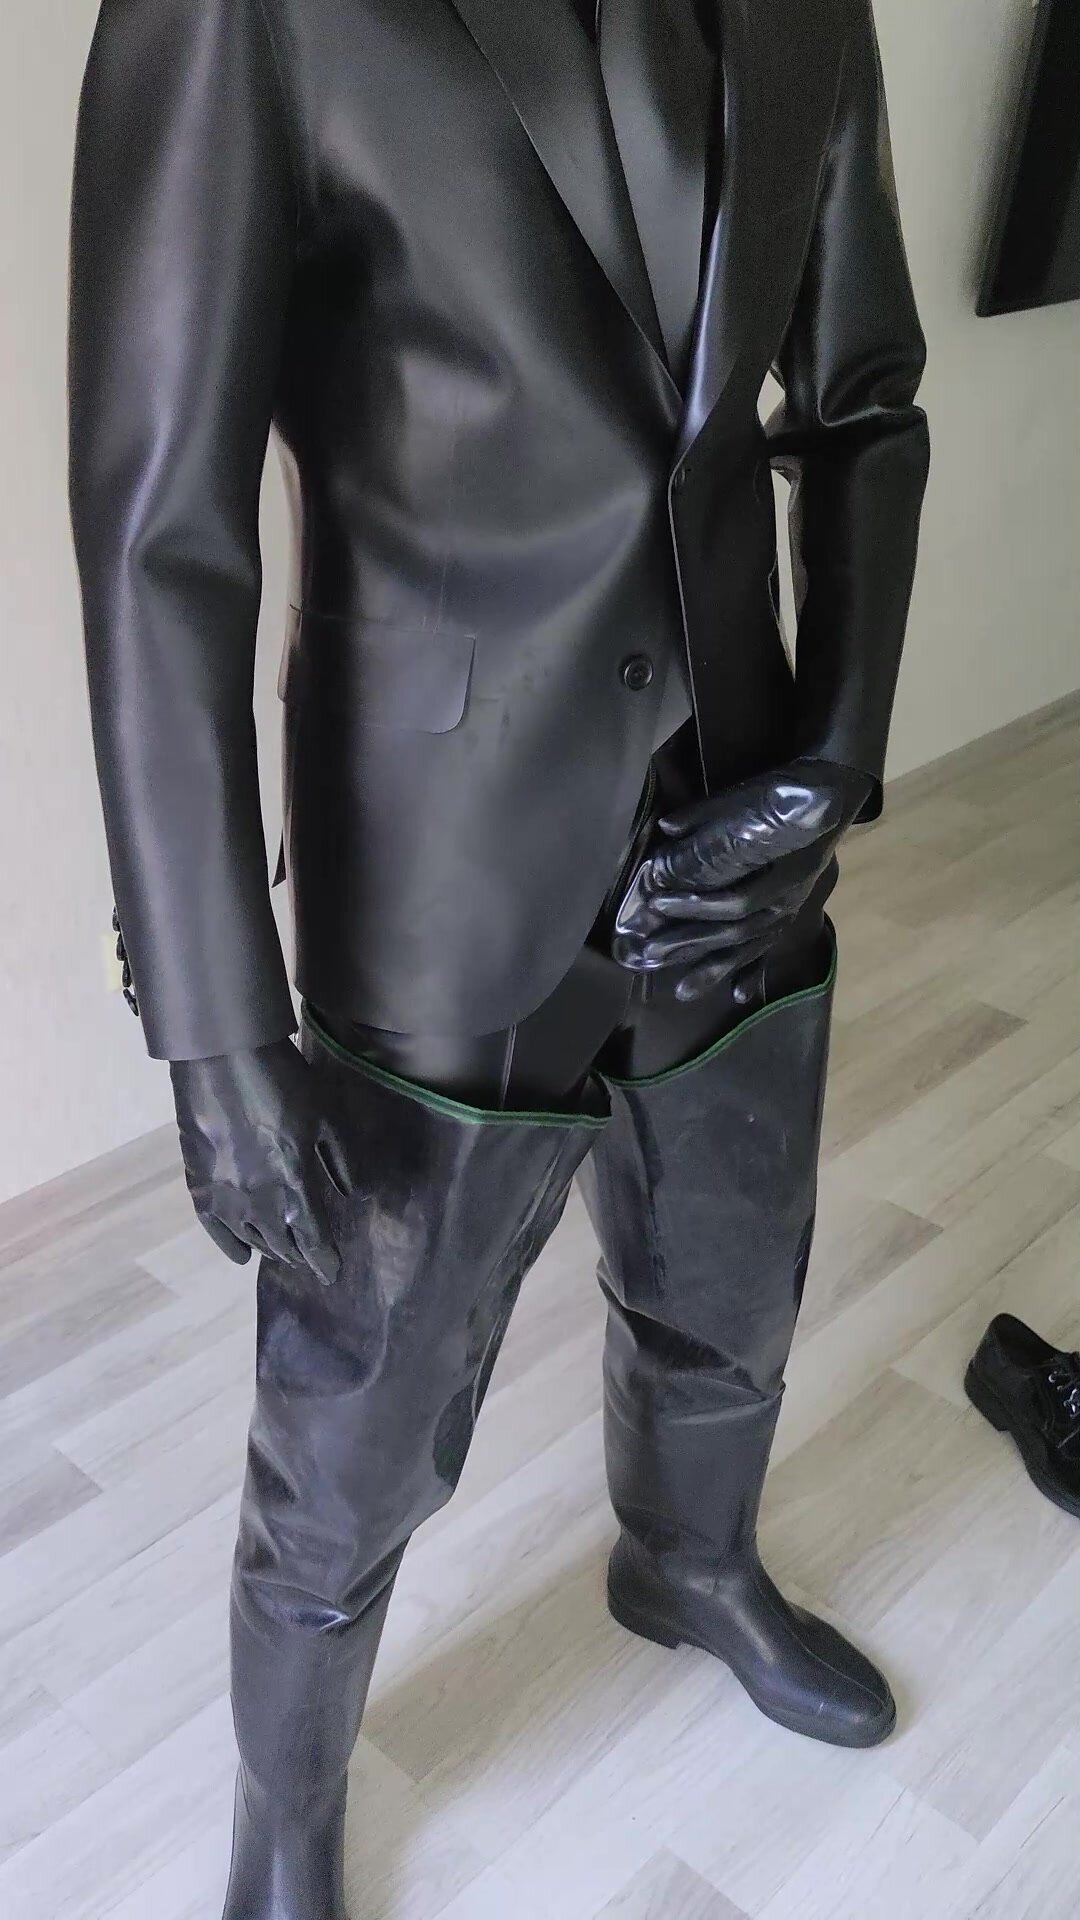 Classic latex suit and waders fun